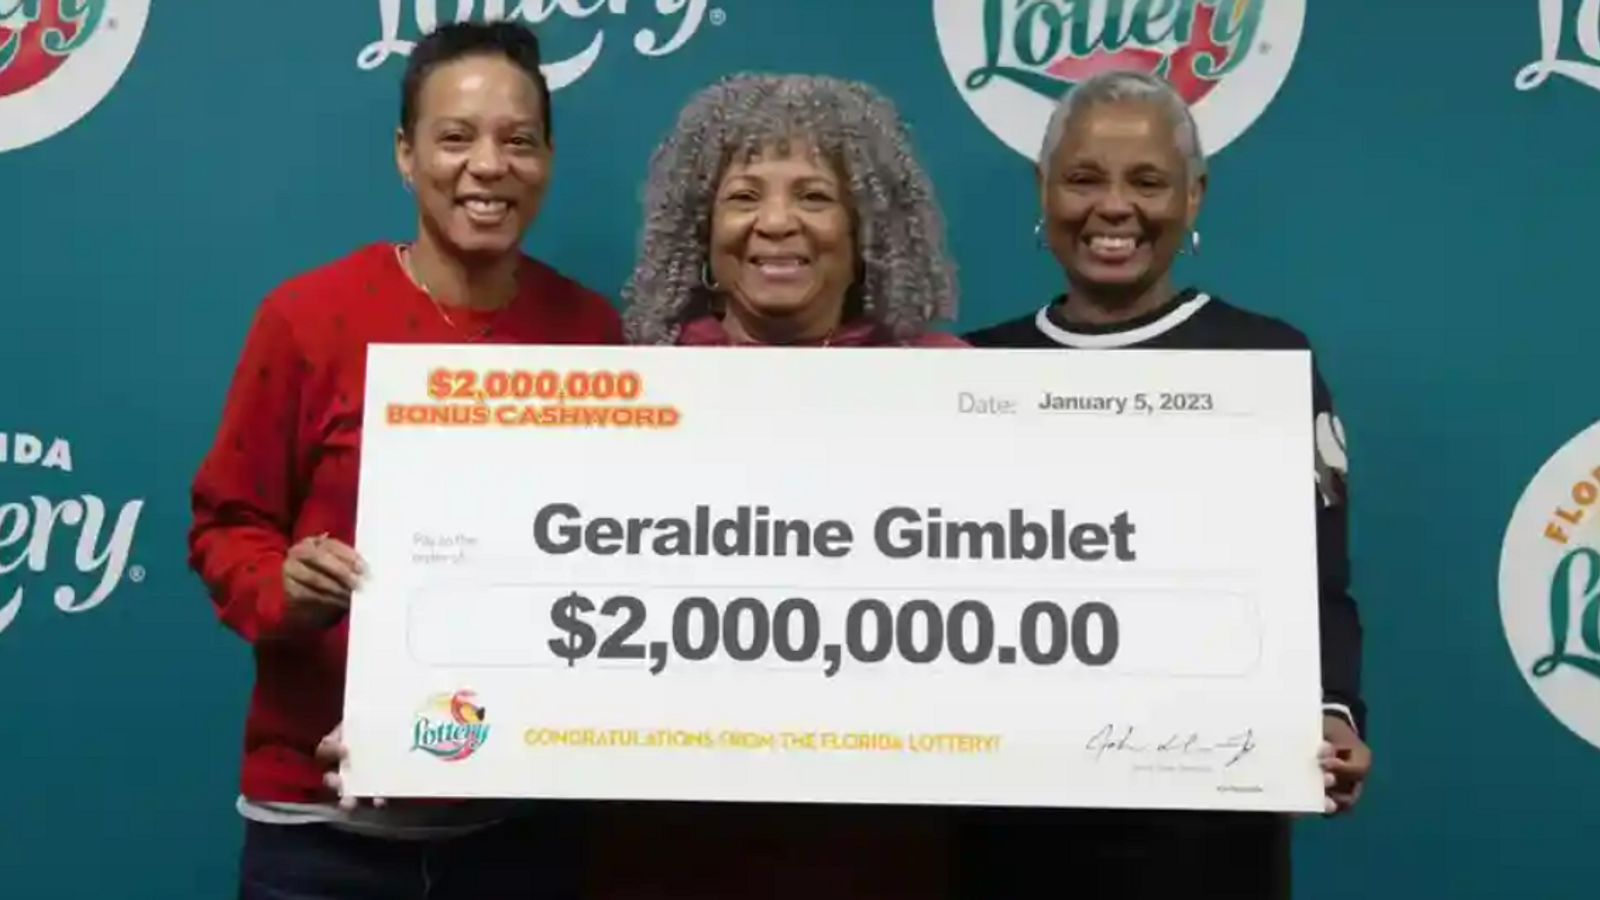 Mother wins lottery after spending life savings on daughter’s cancer treatment